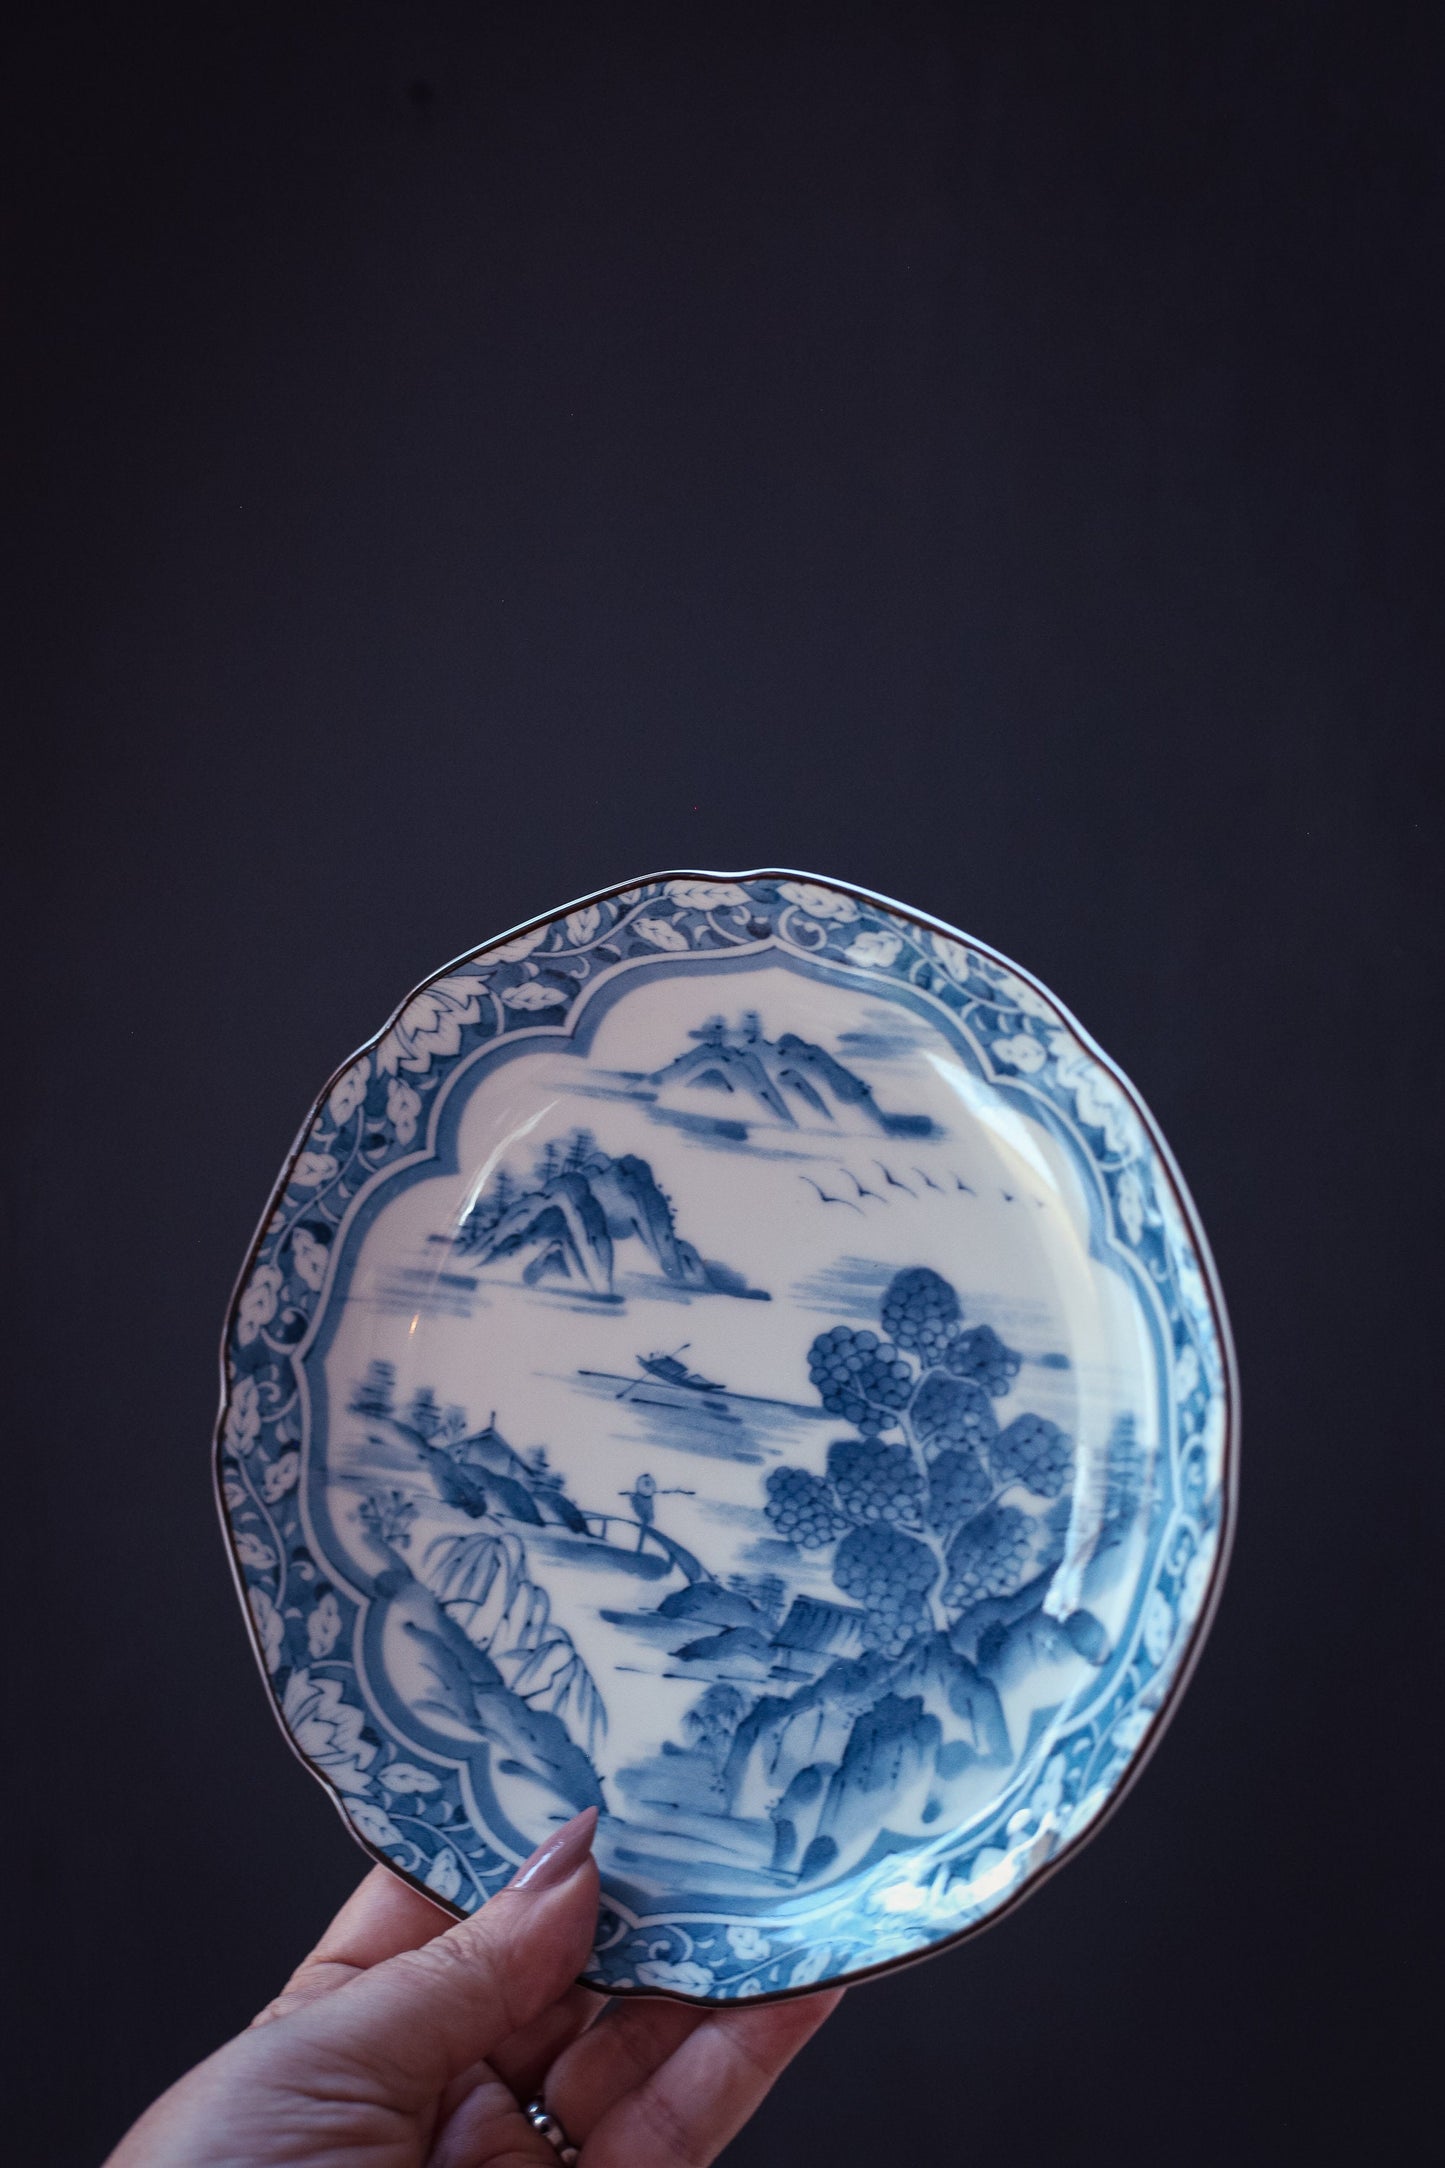 Hand Painted Blue White Japanese Scenic Plate - Vintage Blue & White Japanese Plate